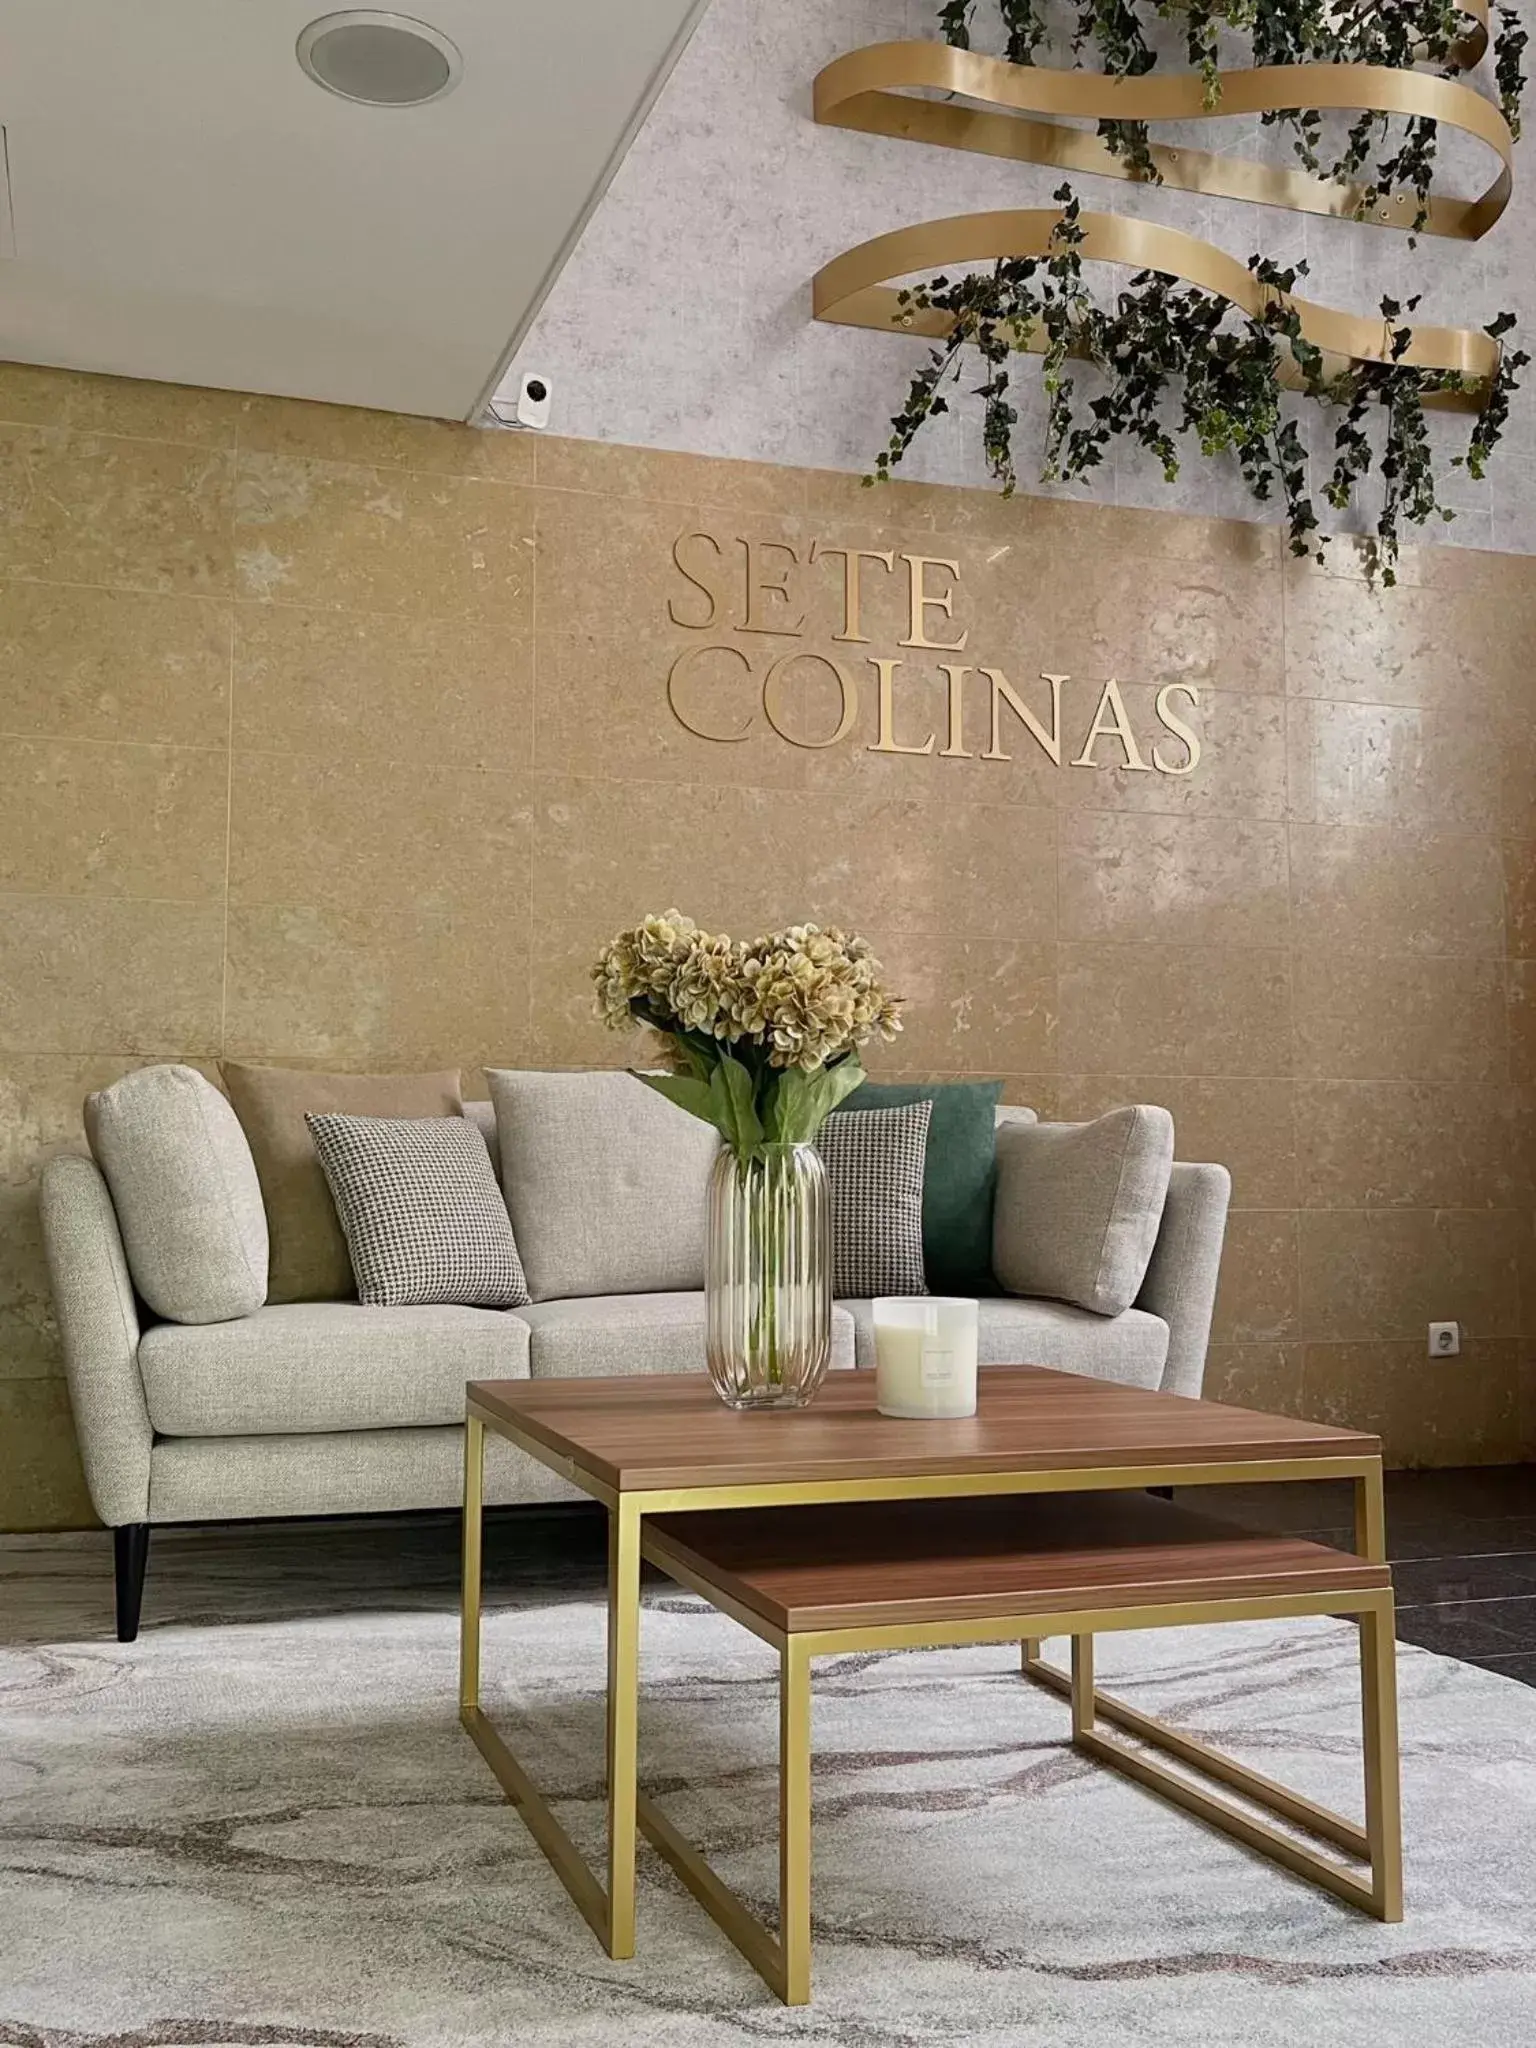 Lobby or reception in Hotel Sete Colinas